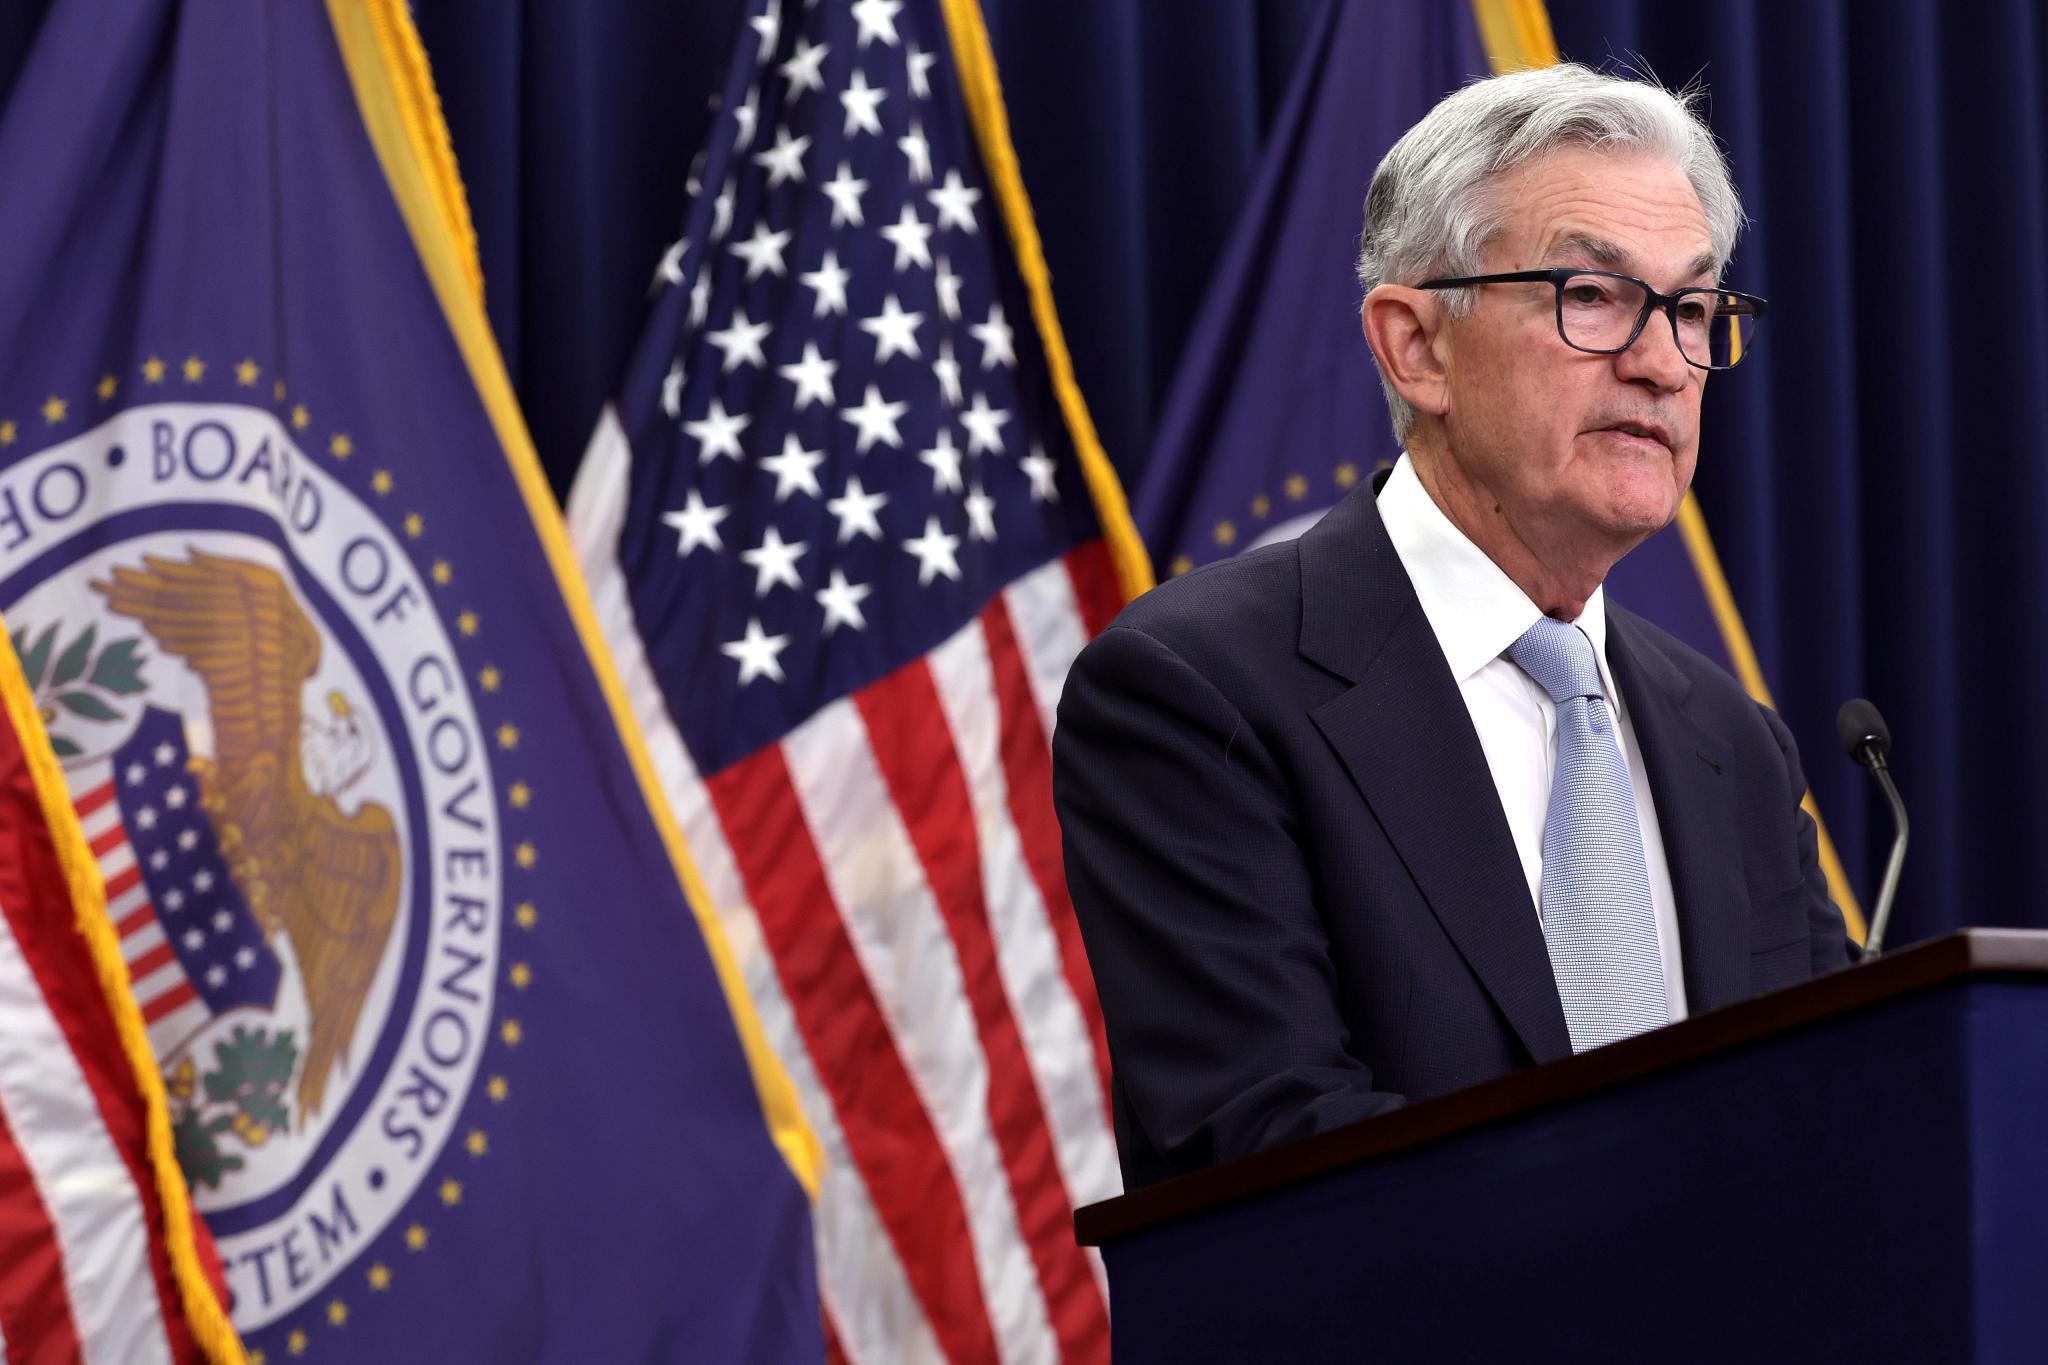 Federal Reserve Board Chairman Jerome Powell at Wednesday's news conference at the Federal Reserve. (Getty Images)